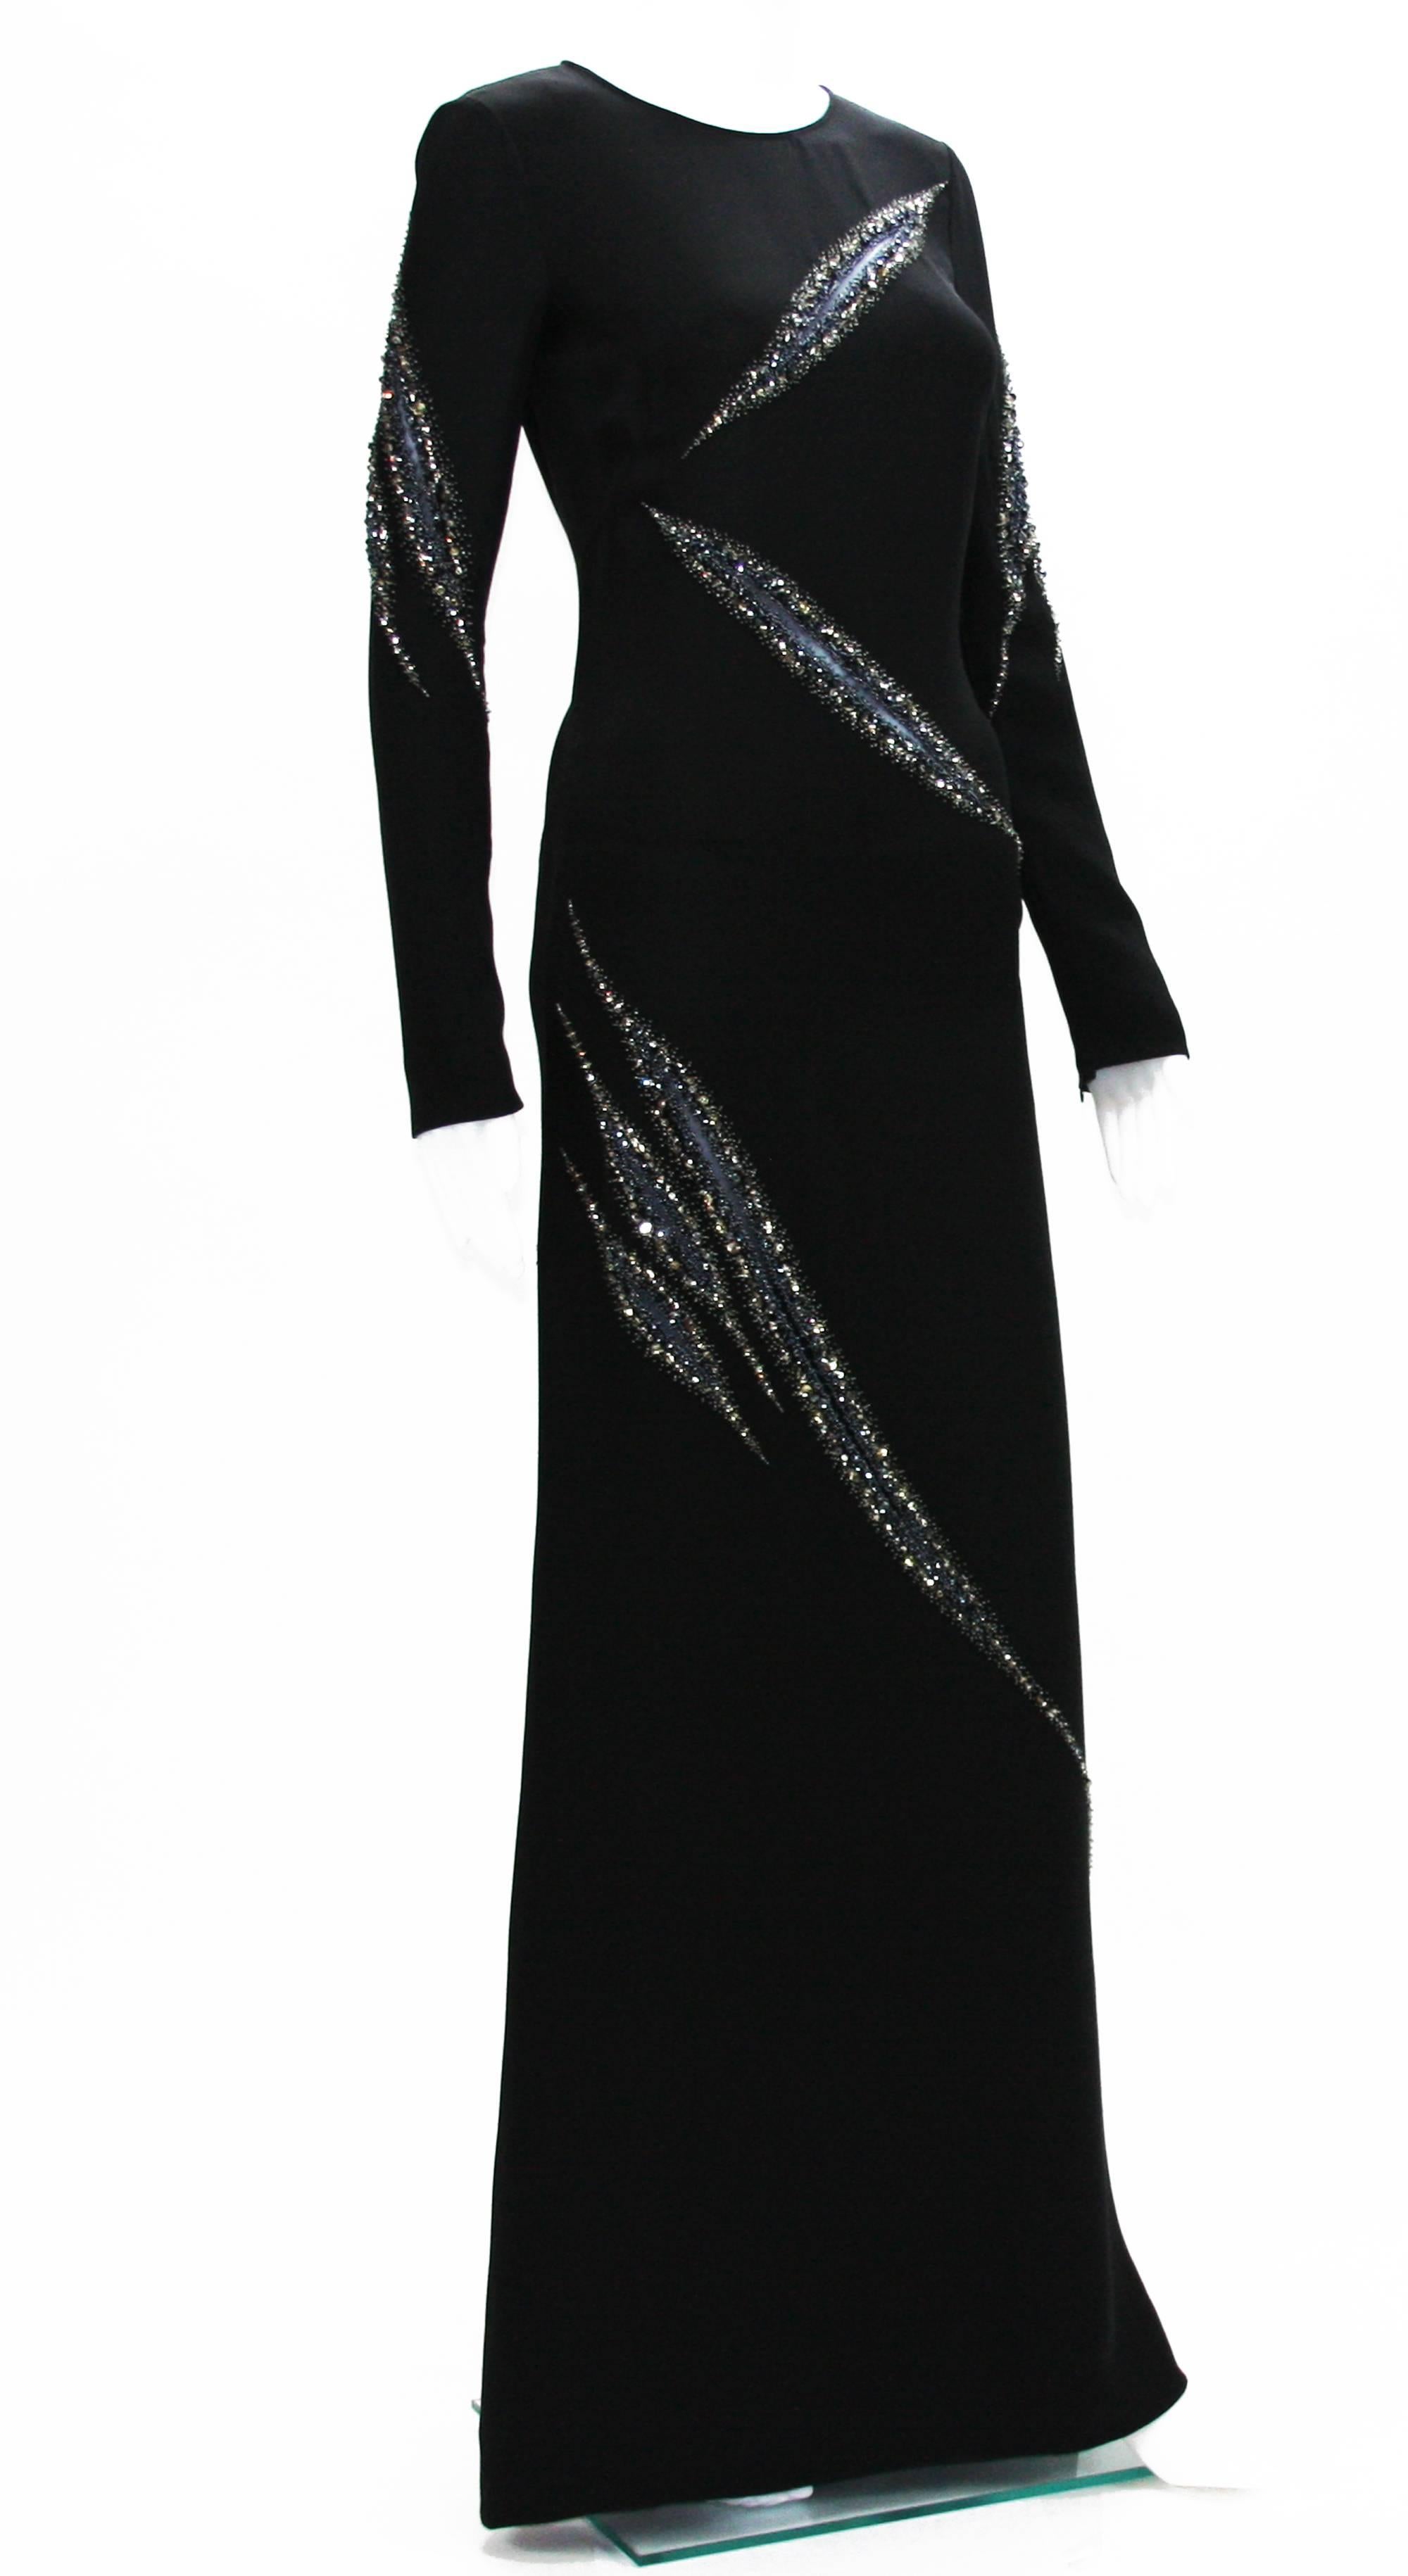 Emilio Pucci Runway Black Embellished Gown.
Sexy Slashed Details Accent with Silver / Black Crystals Embellishments.
This Sleek Dress Featured Gorgeous Embellishing in a Slashed Sheer Inset Pattern All Over. 
IT size 38 - US 4
100% Silk.
Double